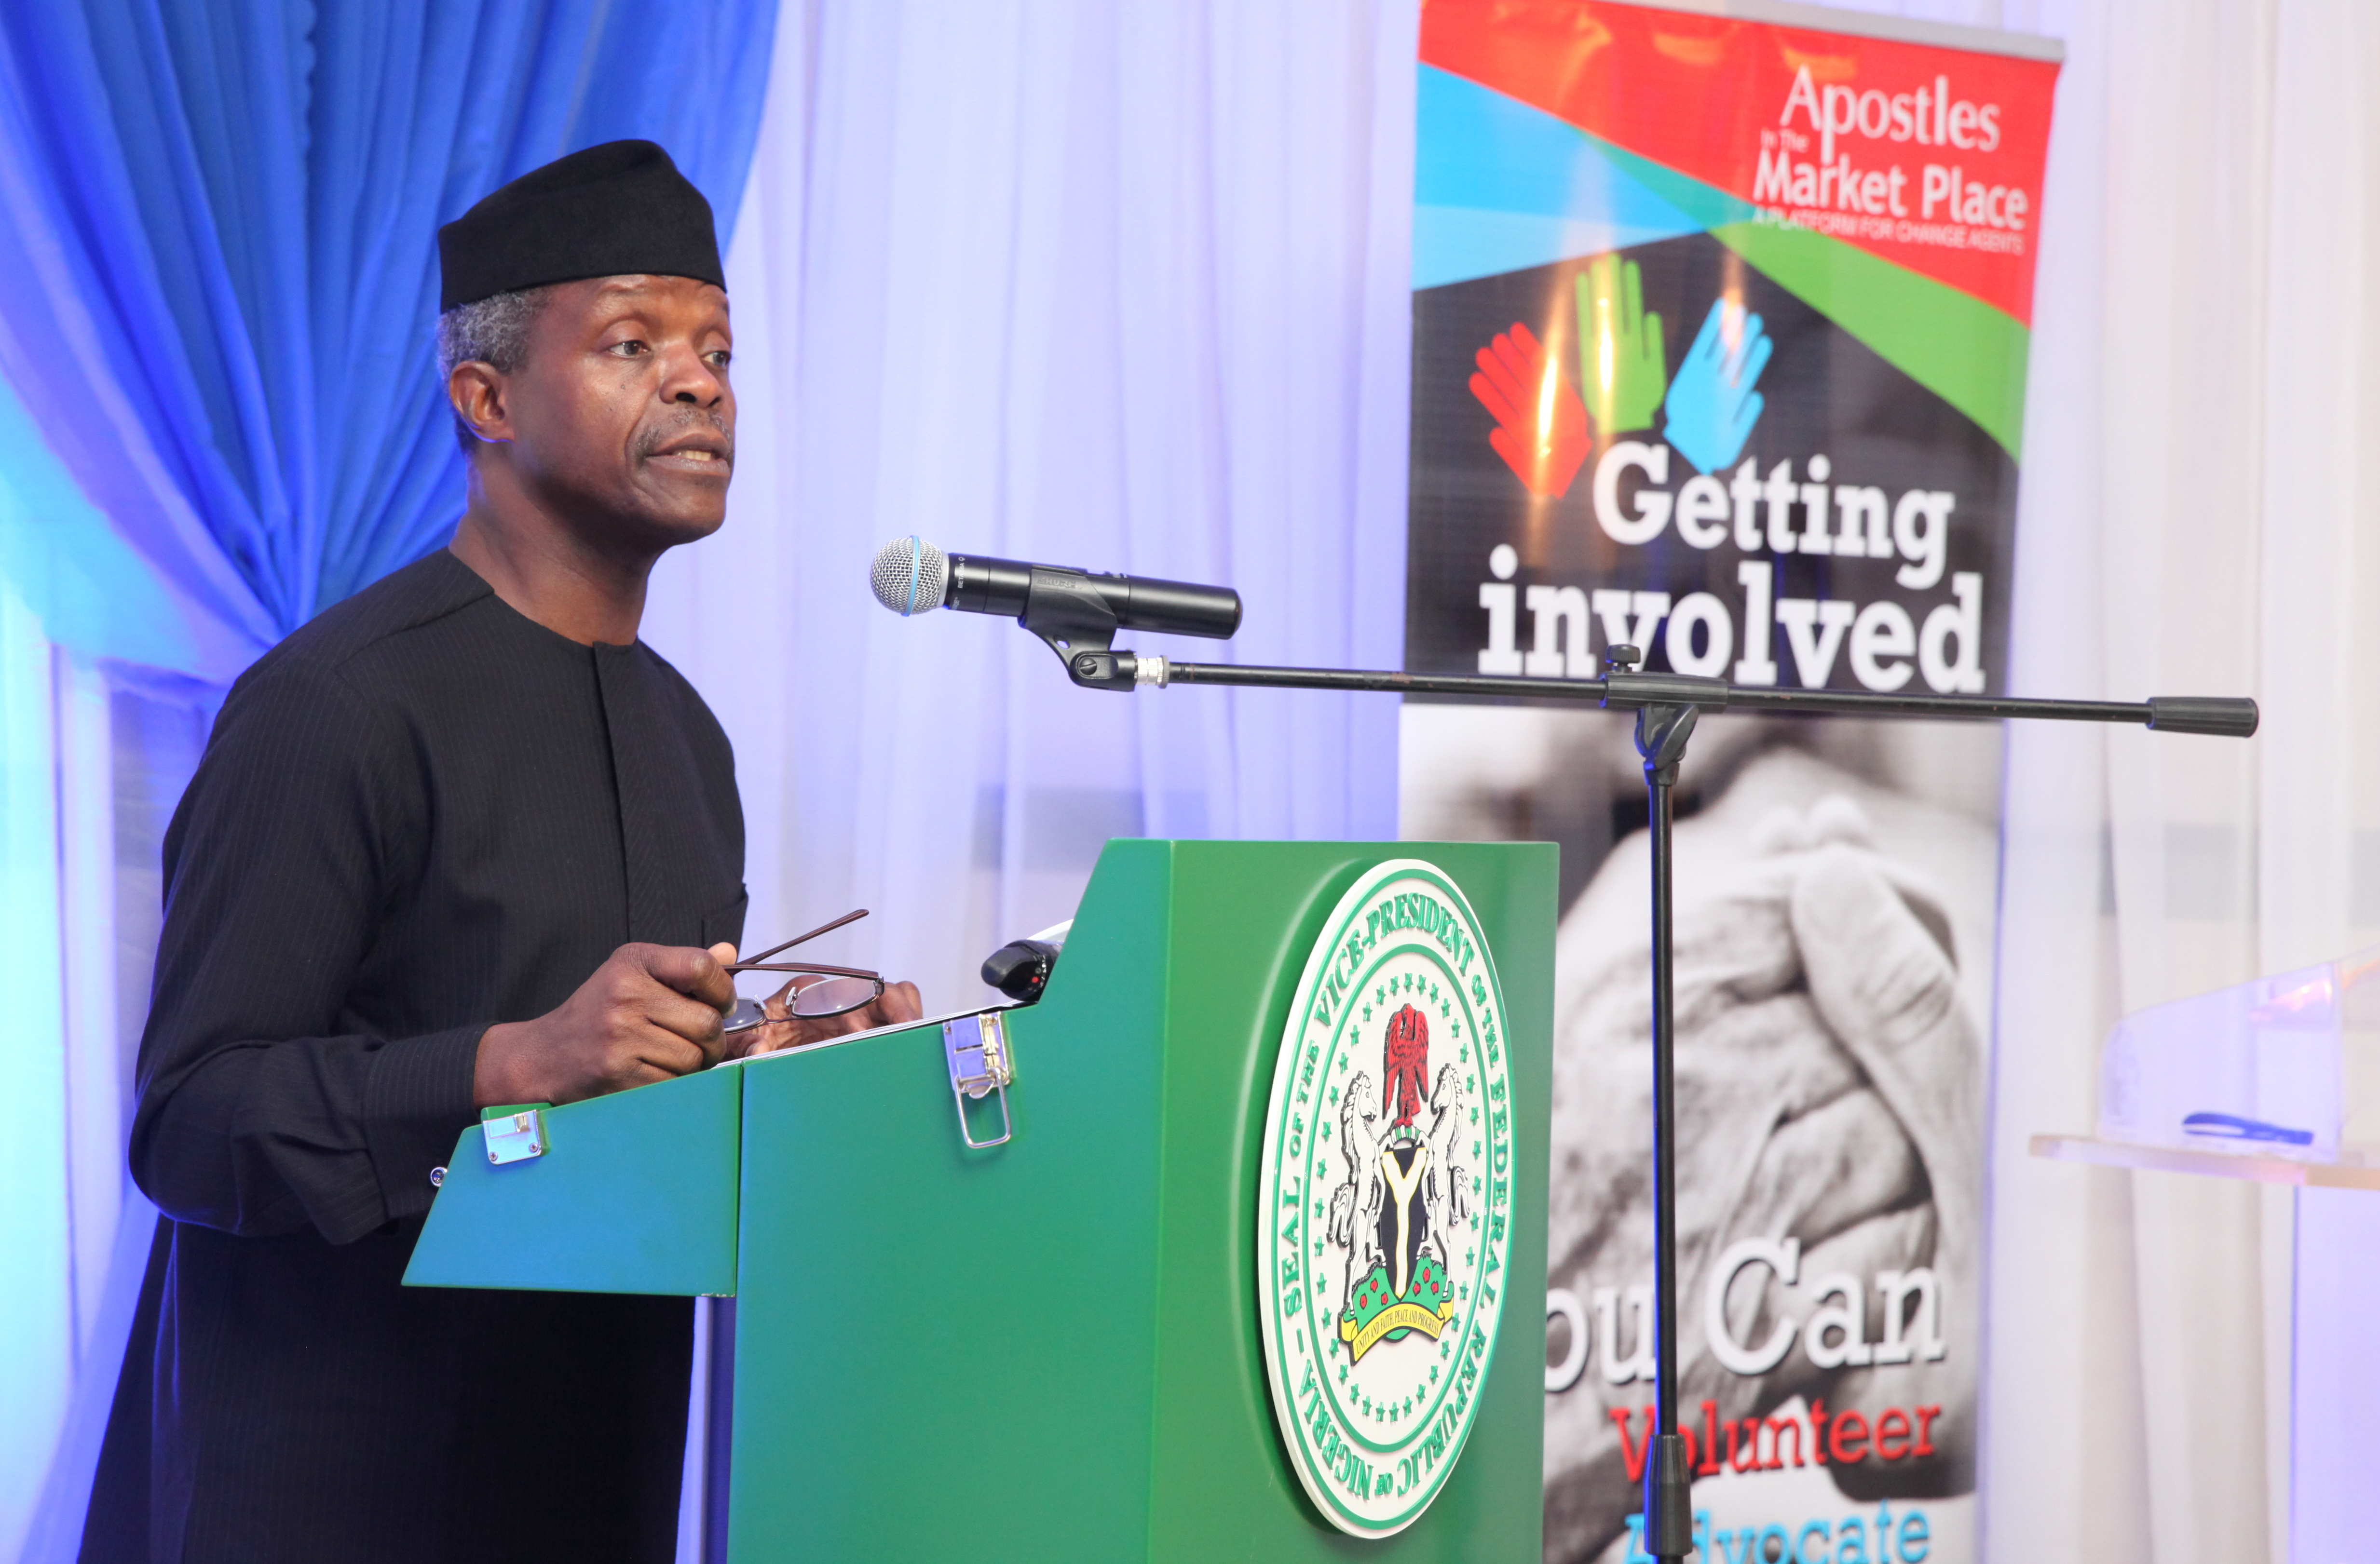 VP Osinbajo Attends The Apostles In The Market Place (A Platform for Change Agents) Event On 20/02/2016